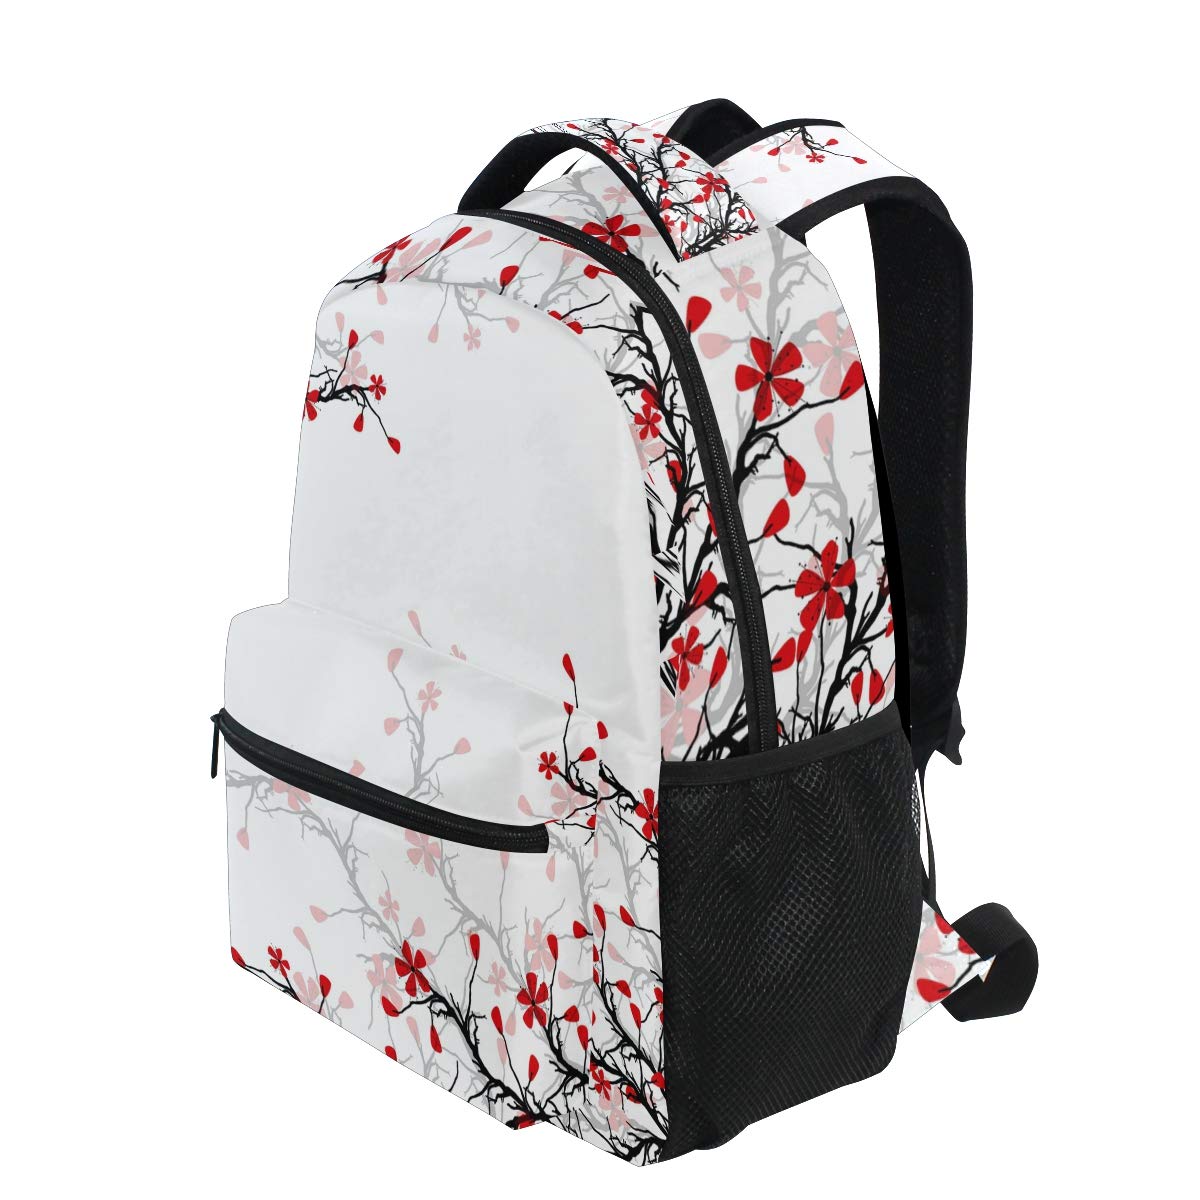 ALAZA Japanese Cherry Blossom Sakura Large Backpack for Girls Kids School Women Personalized Laptop iPad Tablet Travel School Bag with Multiple Pockets for Men Women College